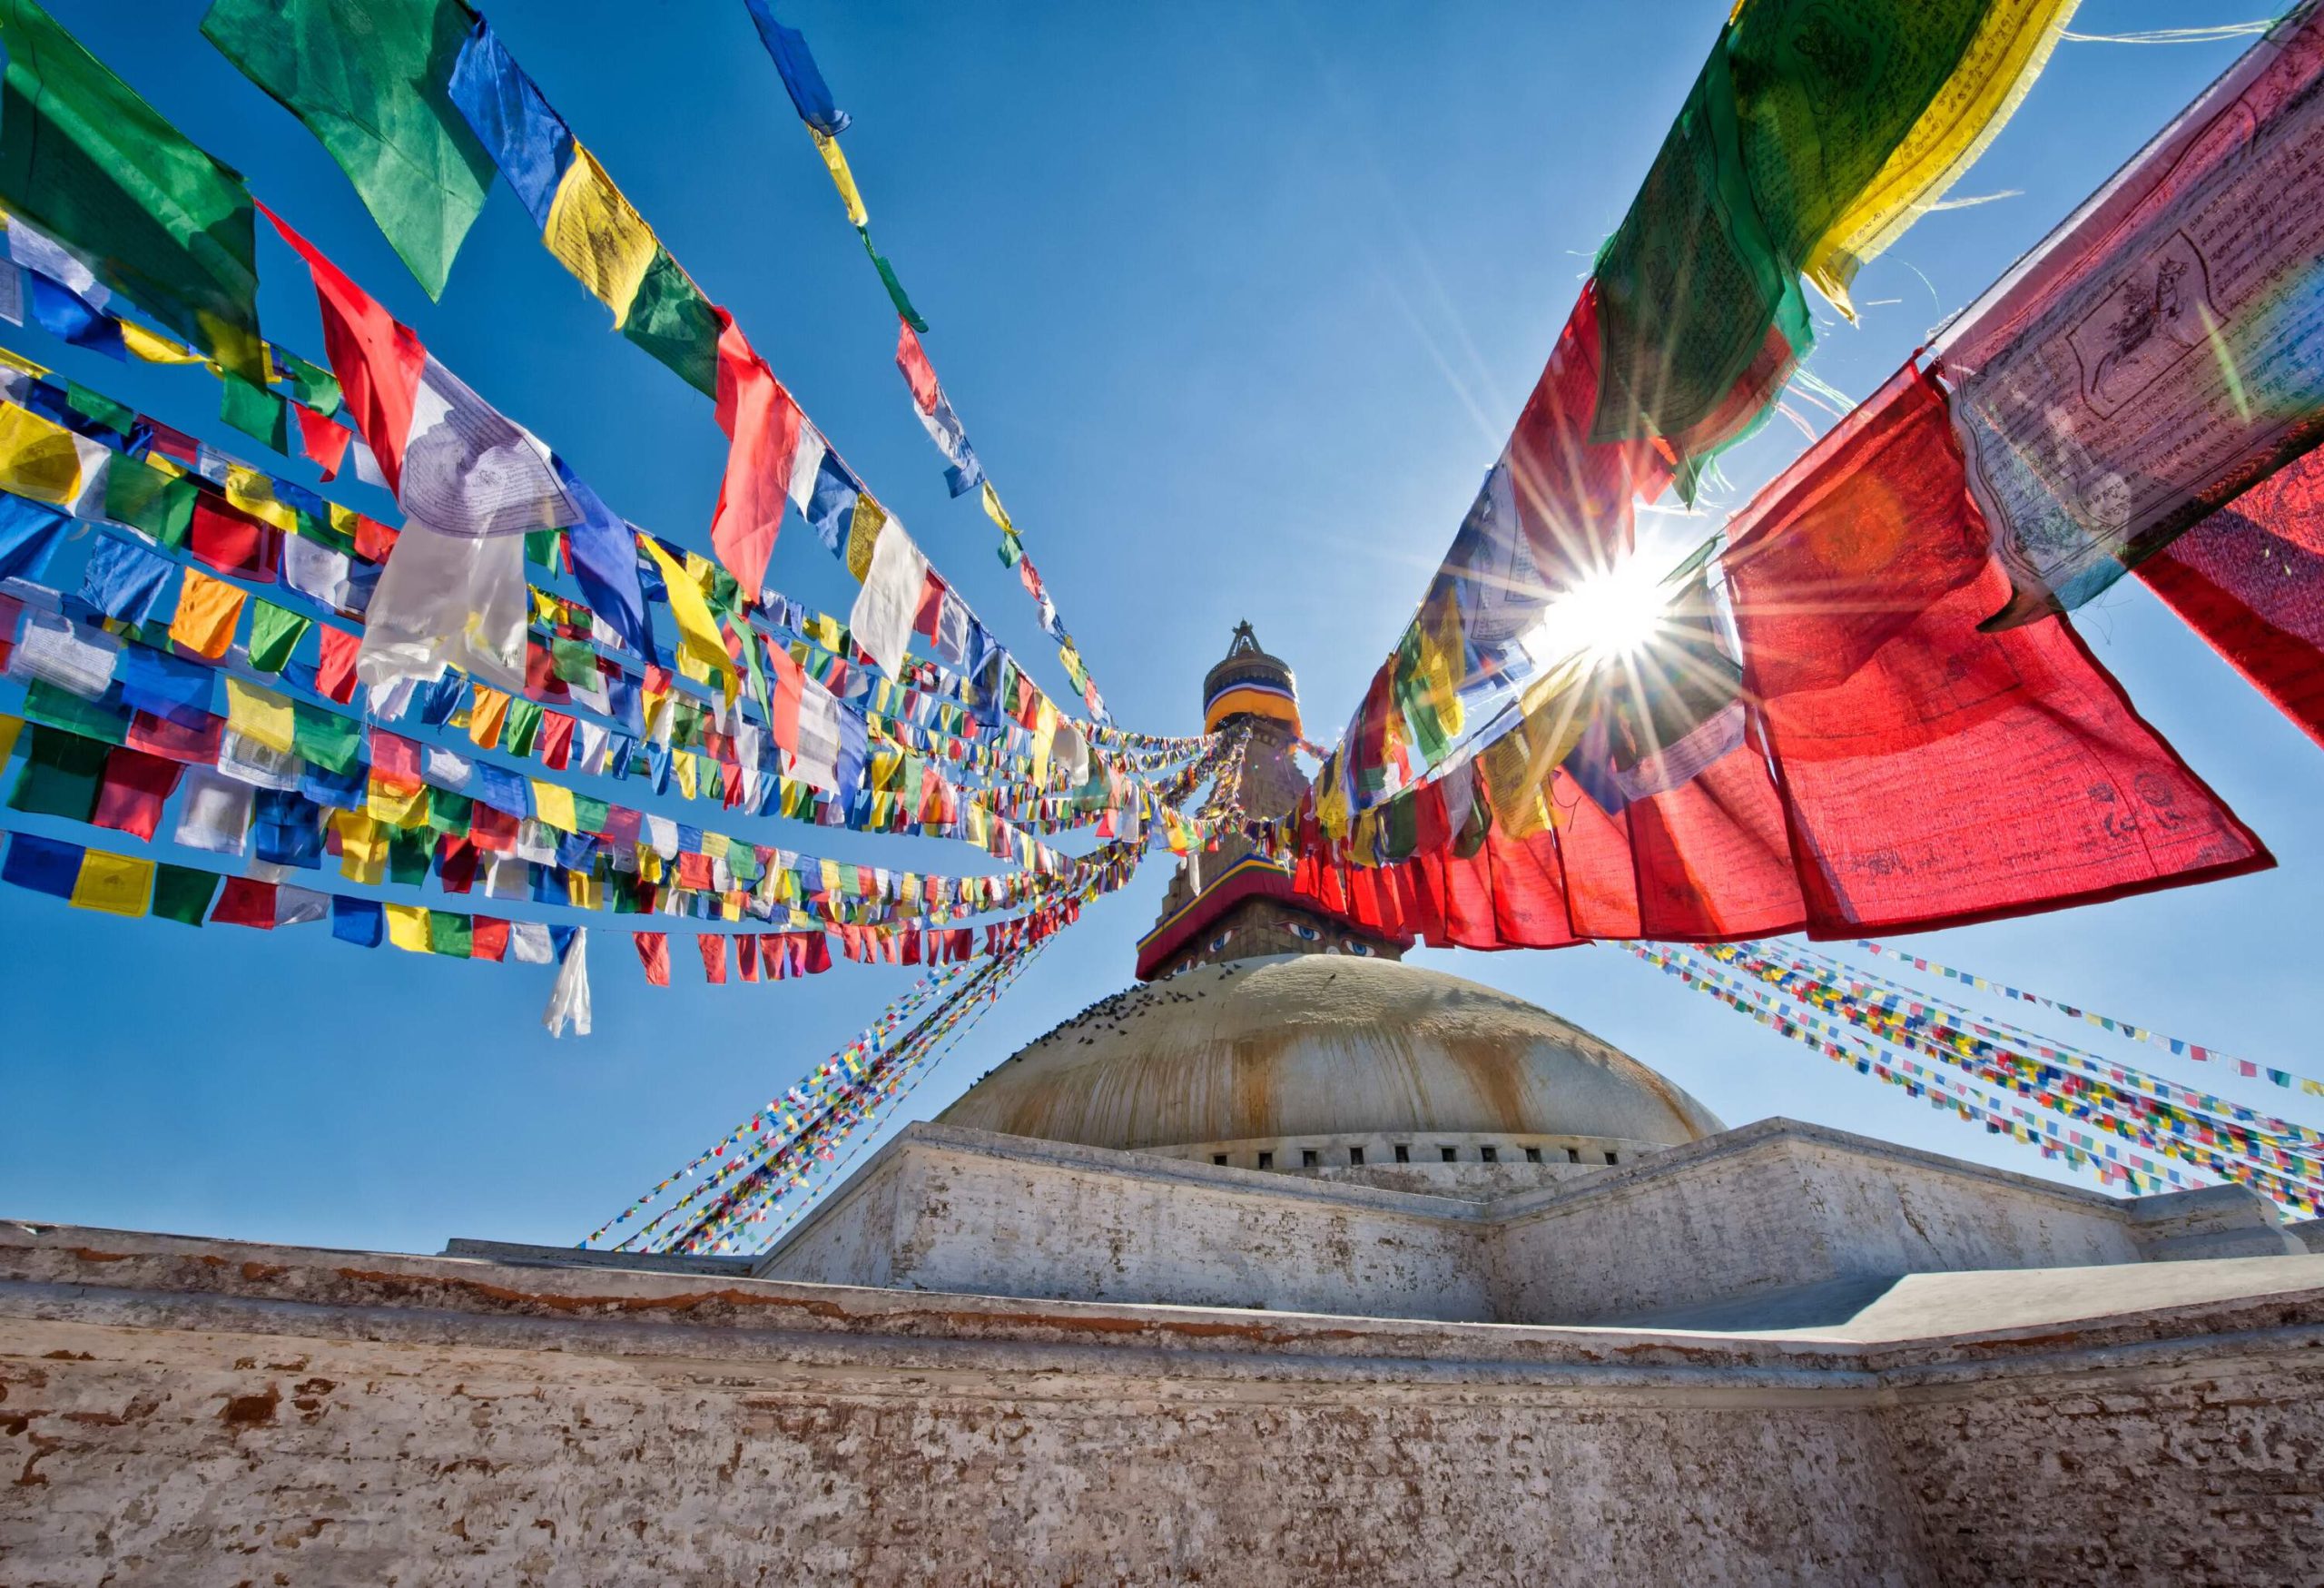 On top of a stupa are hanging colourful prayer flags against the sun's rays in the cloudless sky.